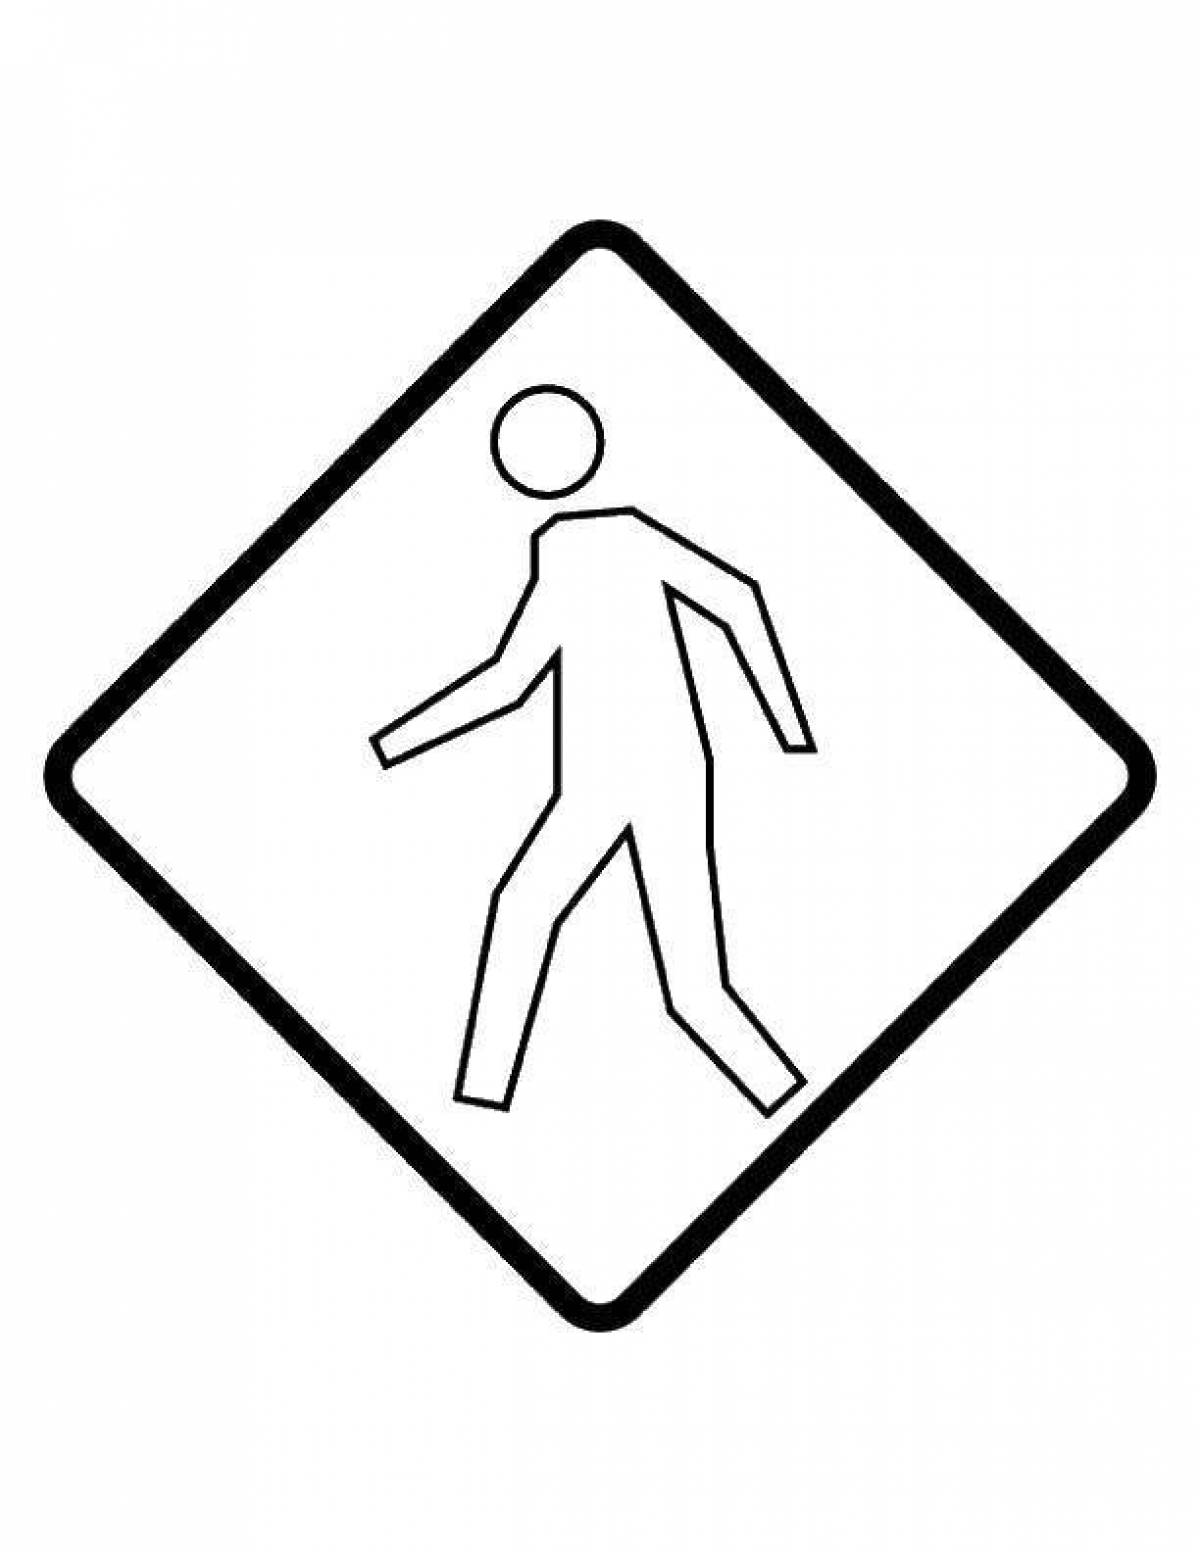 Coloring page bold crosswalk sign